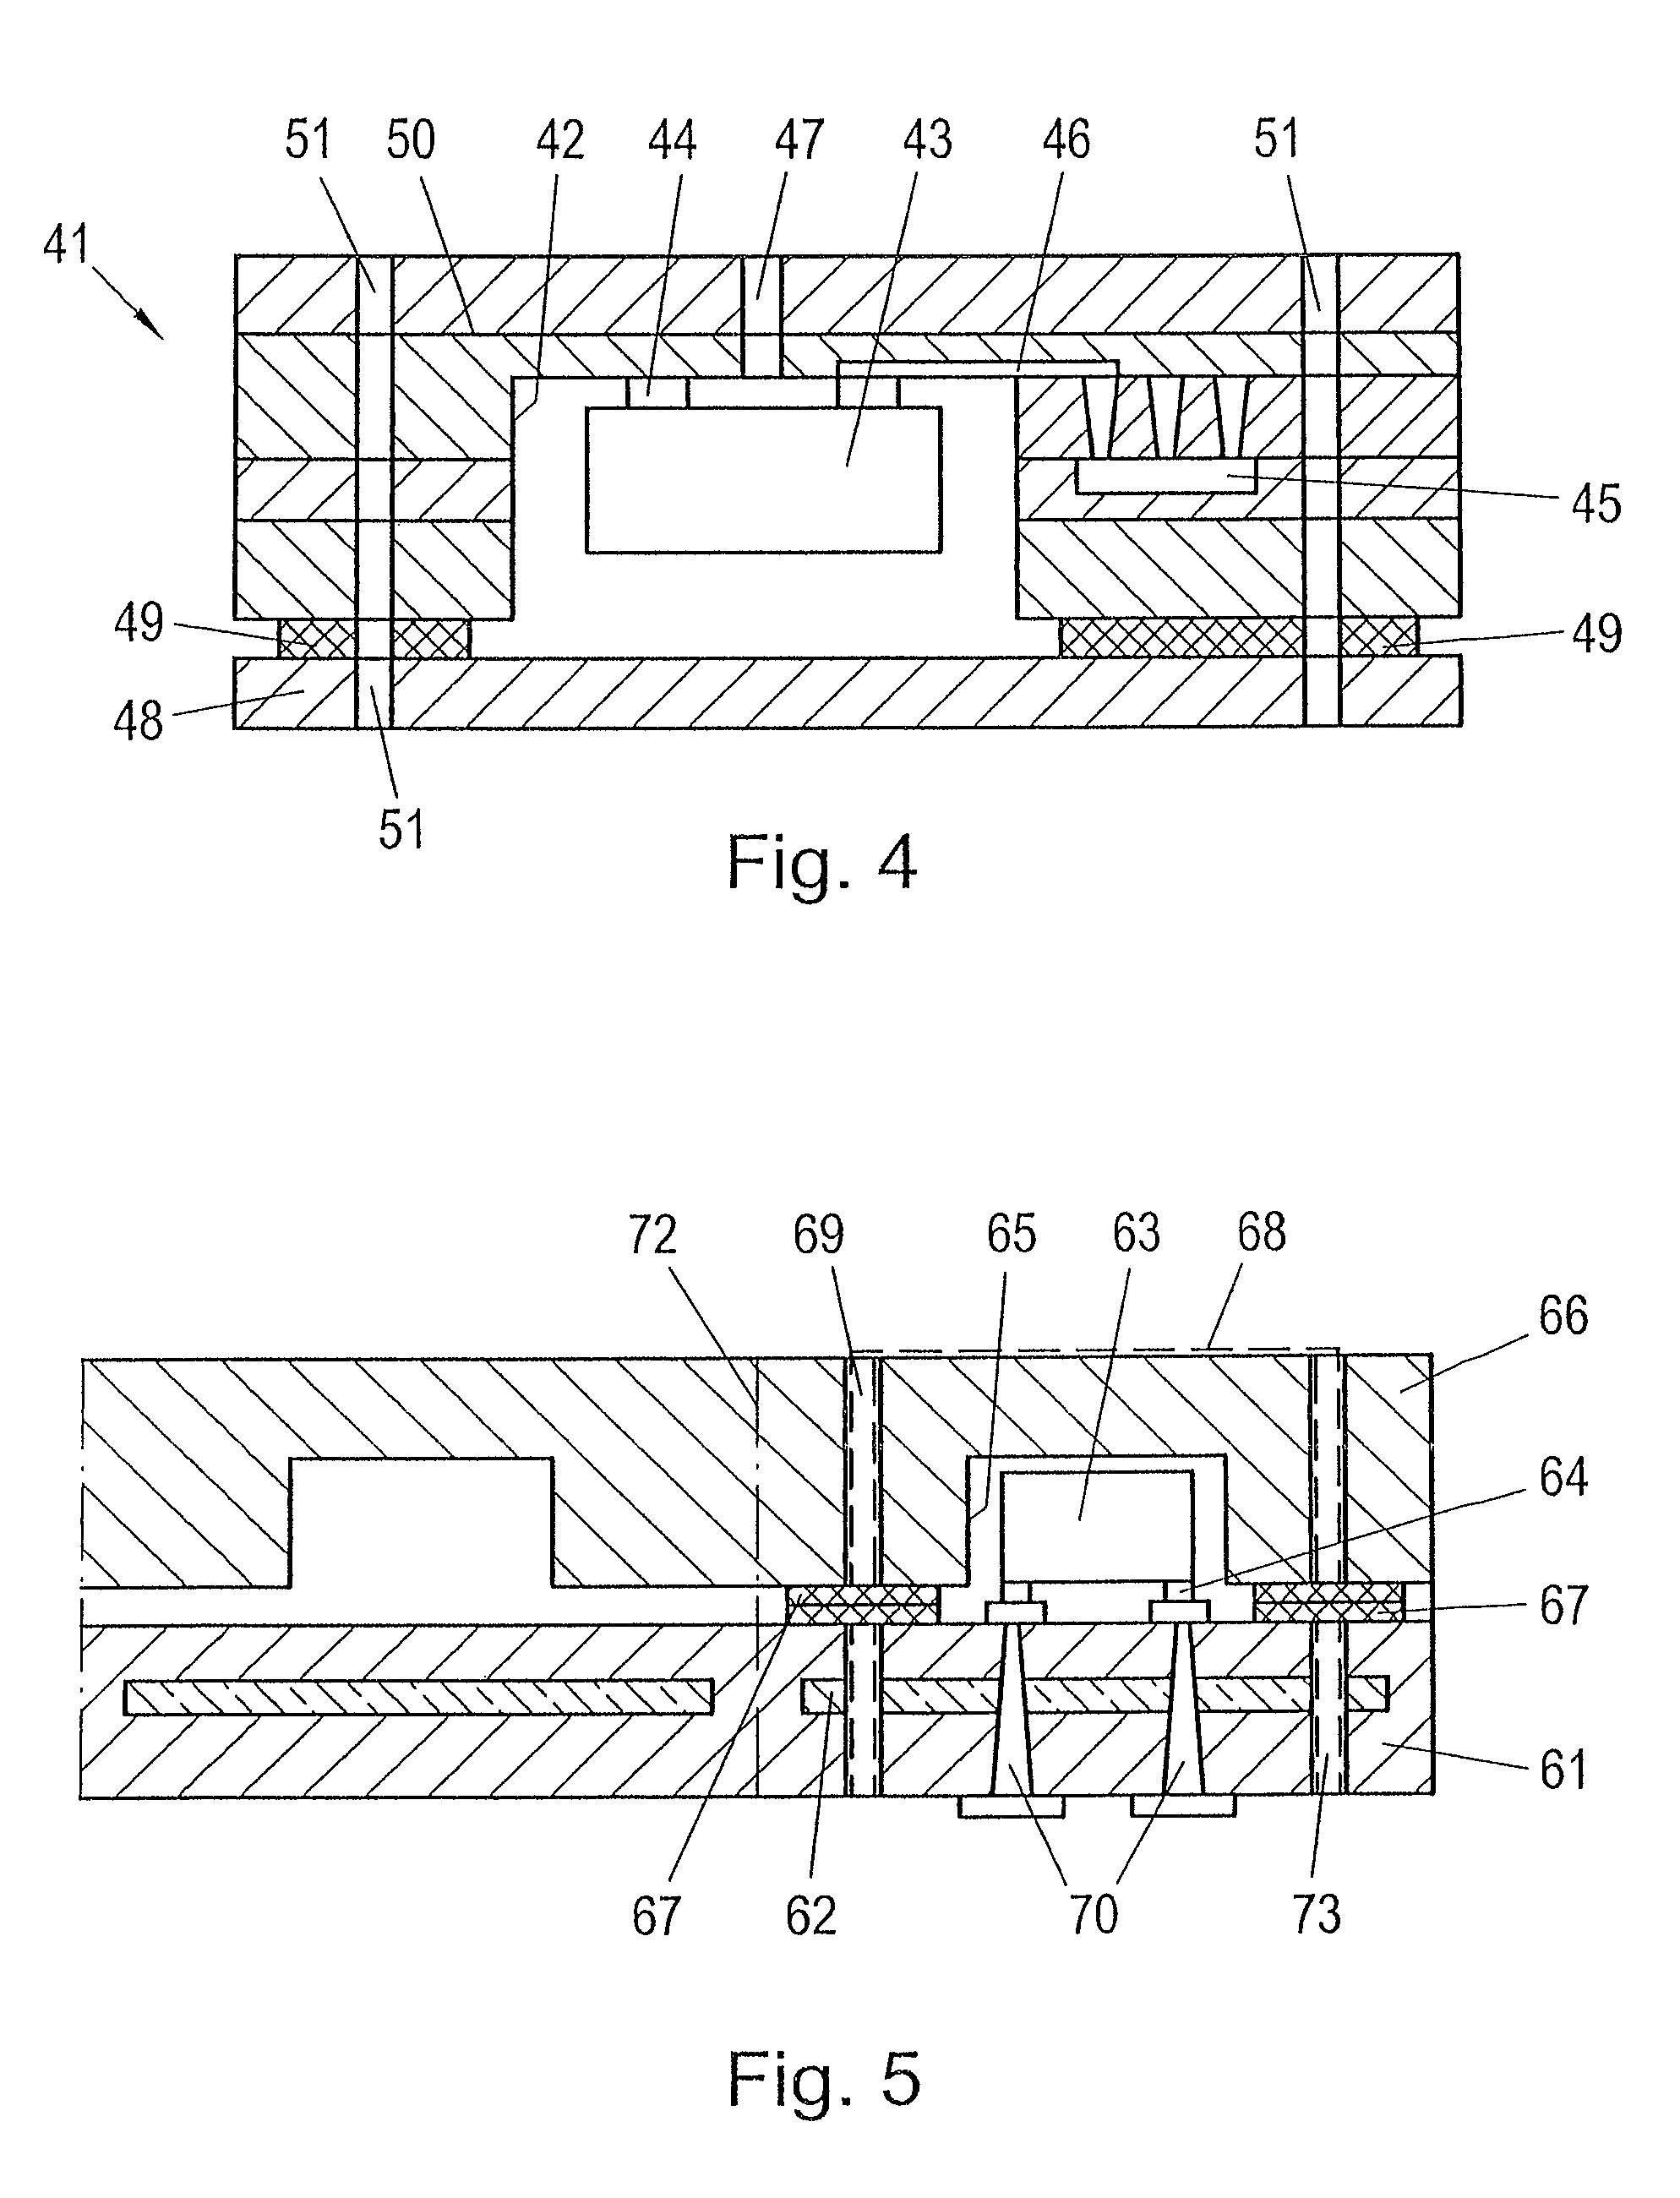 Method for integrating an electronic component into a printed circuit board